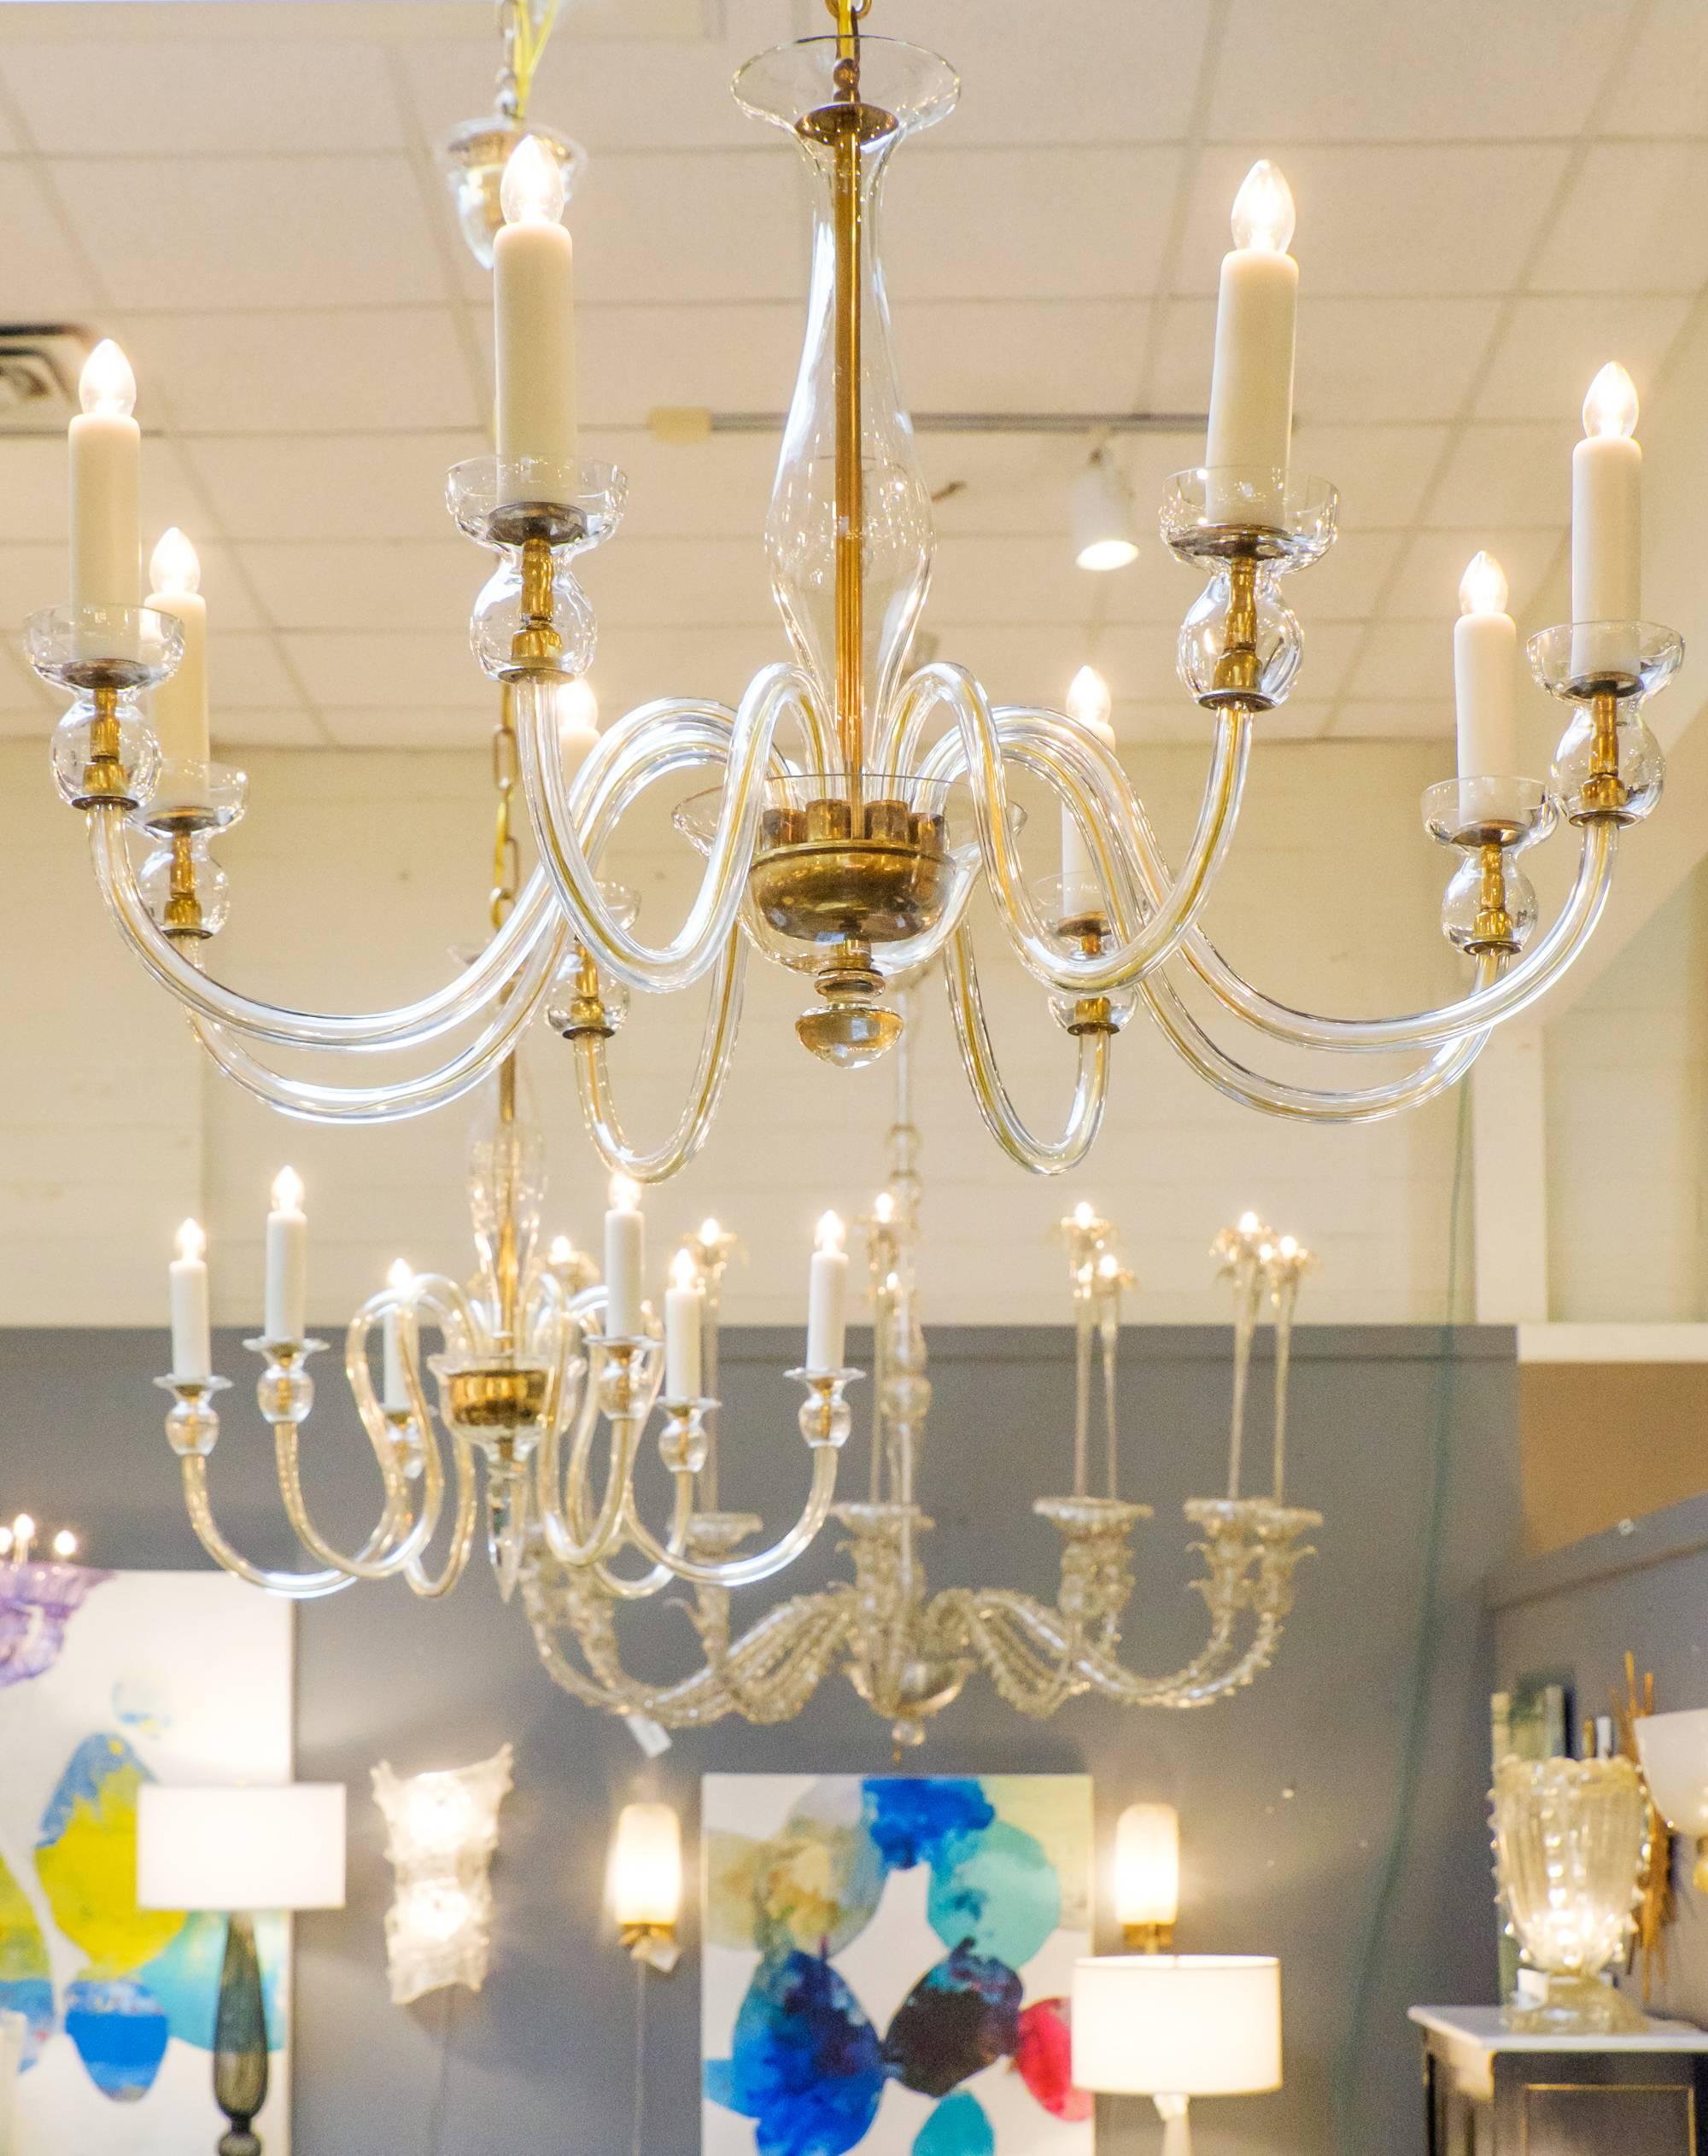 A beautiful and elegant modernist take, this Murano amber glass eight-arm chandelier is a perfect piece for dining rooms, foyers and seating areas. This lighting piece makes a sophisticated style statement that creates an intimate environment for a